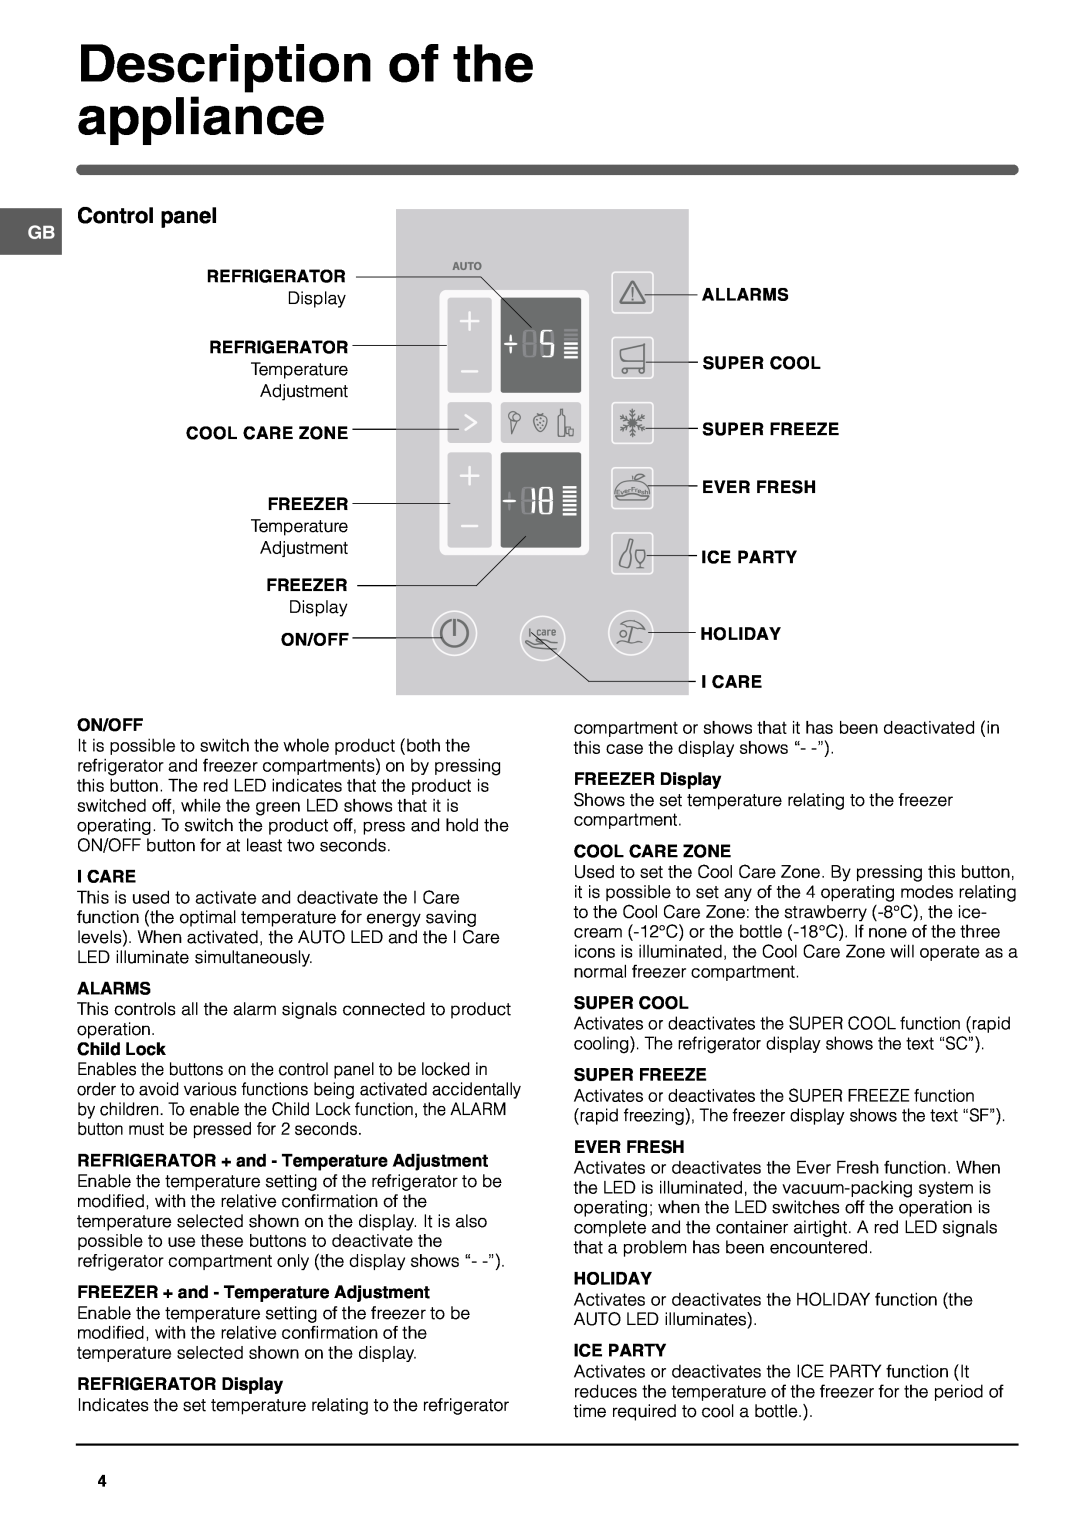 Hotpoint FF200TP manual Description of the appliance, Control panel 